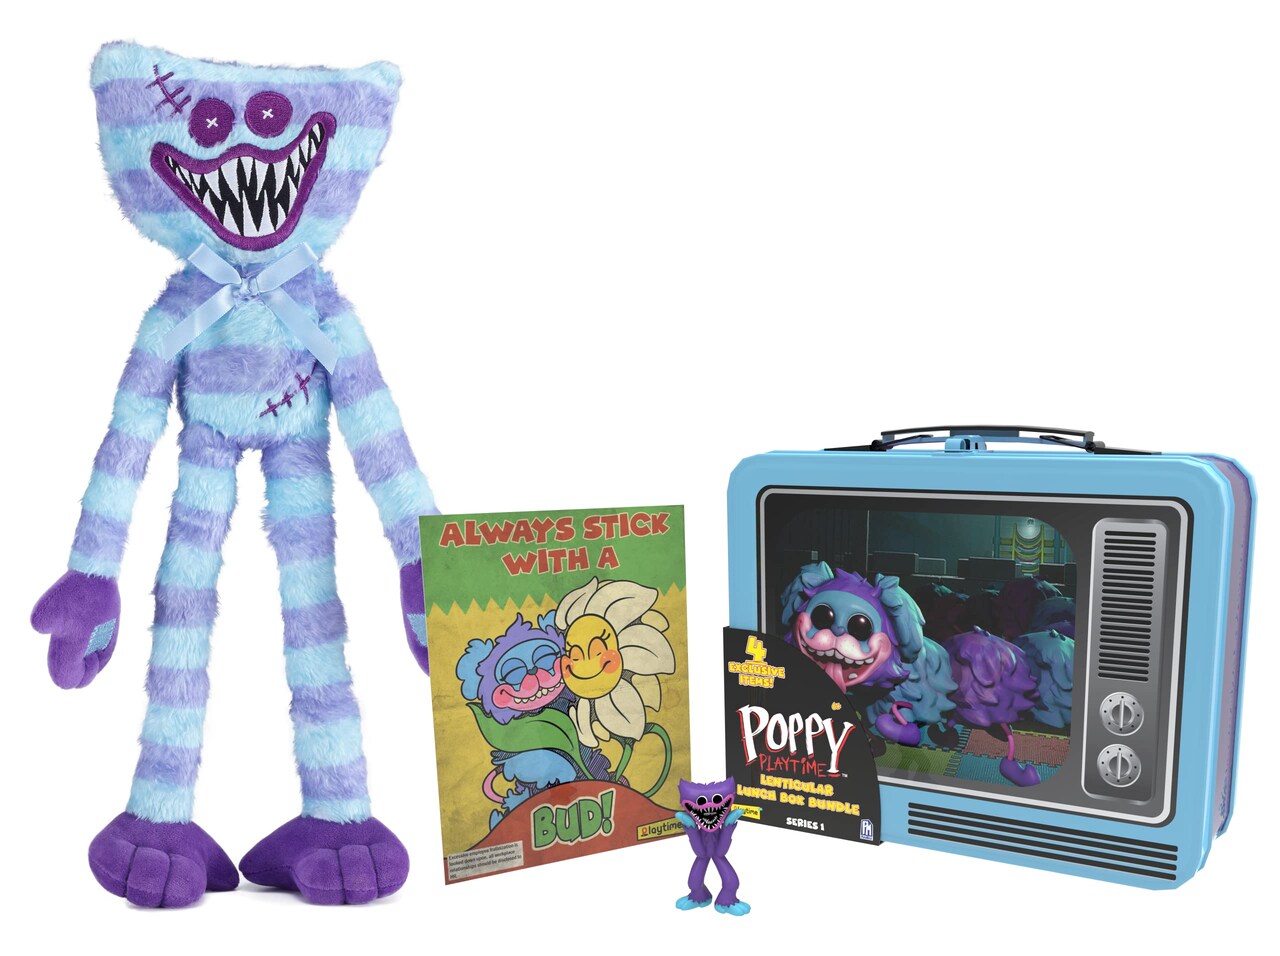  UCC Distributing Poppy Playtime Huggy Wuggy & Friends PJ  Pug-a-Piller Exclusive Lenticular Lunch Box Collectors Bundle - Includes 4  Exclusive Items –Plush, Figure, Mini Poster and Tin Lunch Box: Home 